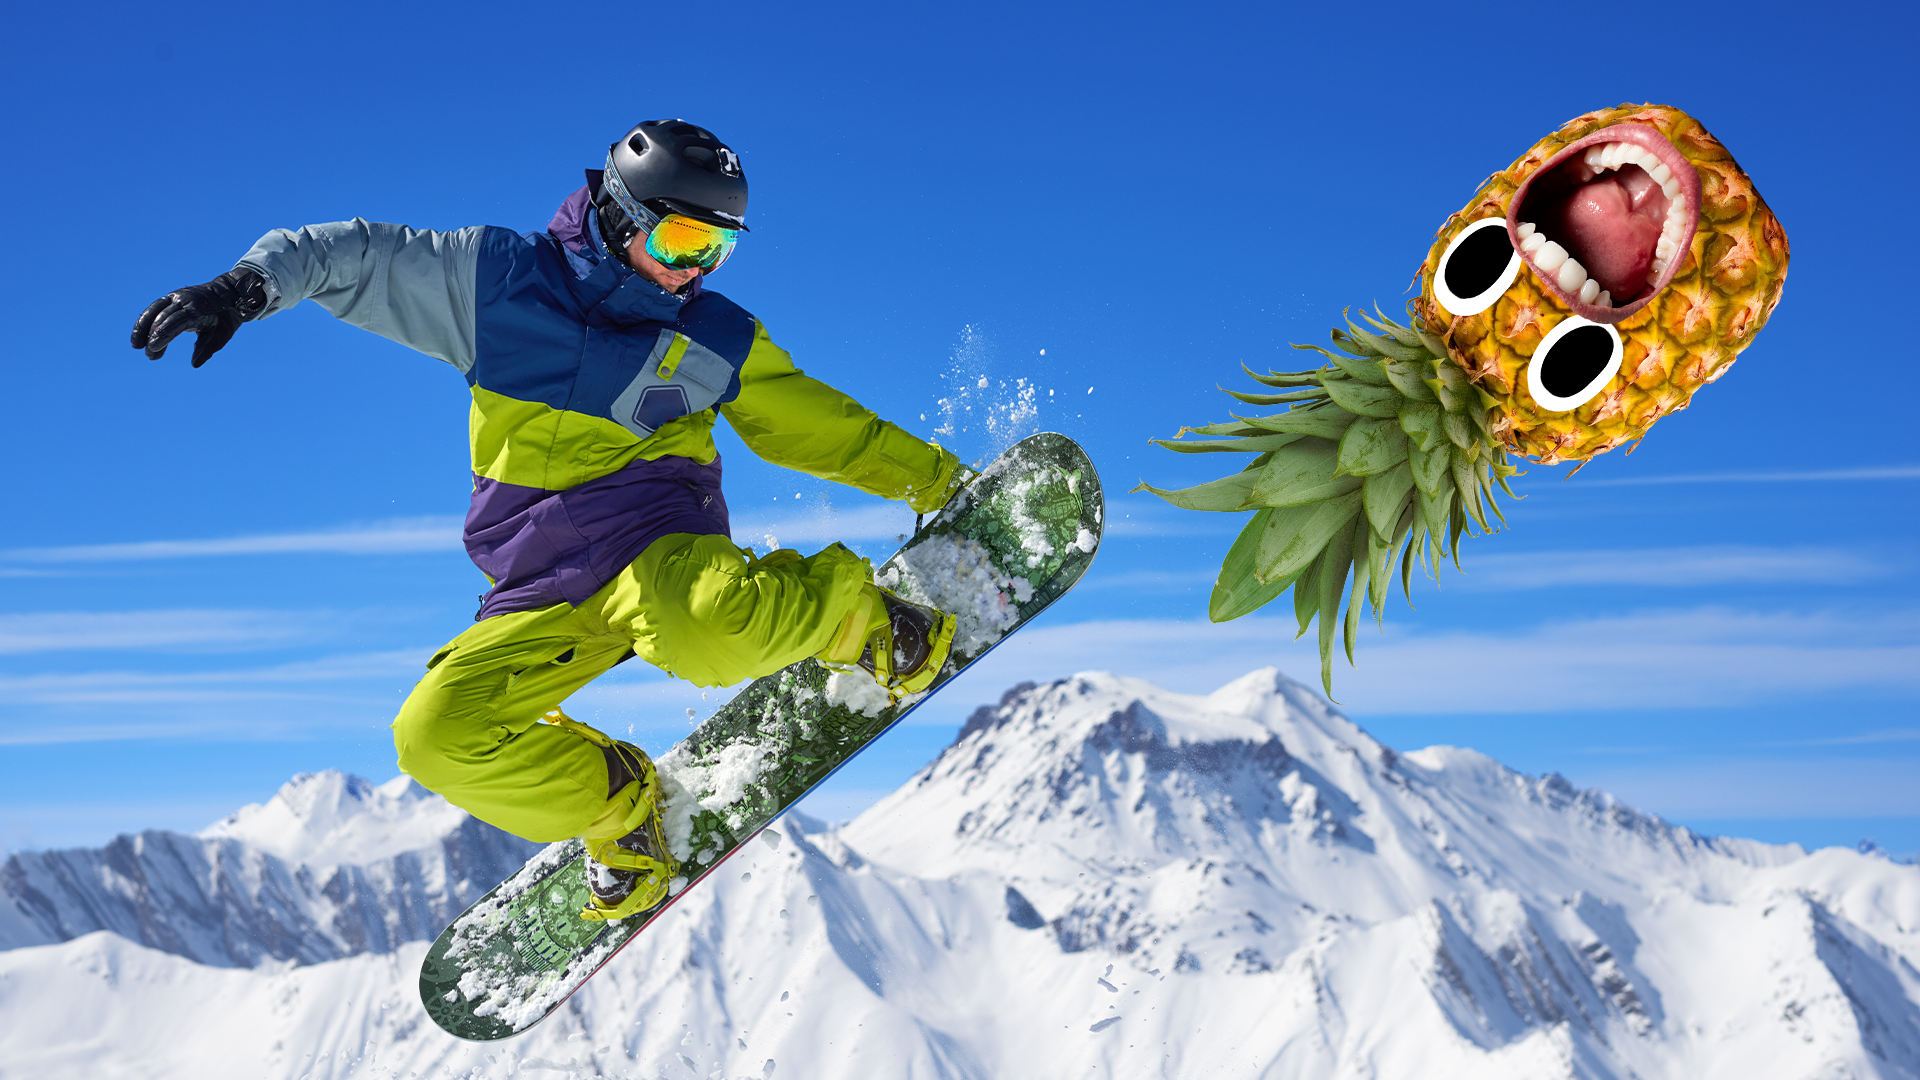 A snowboarder and a screaming pineapple